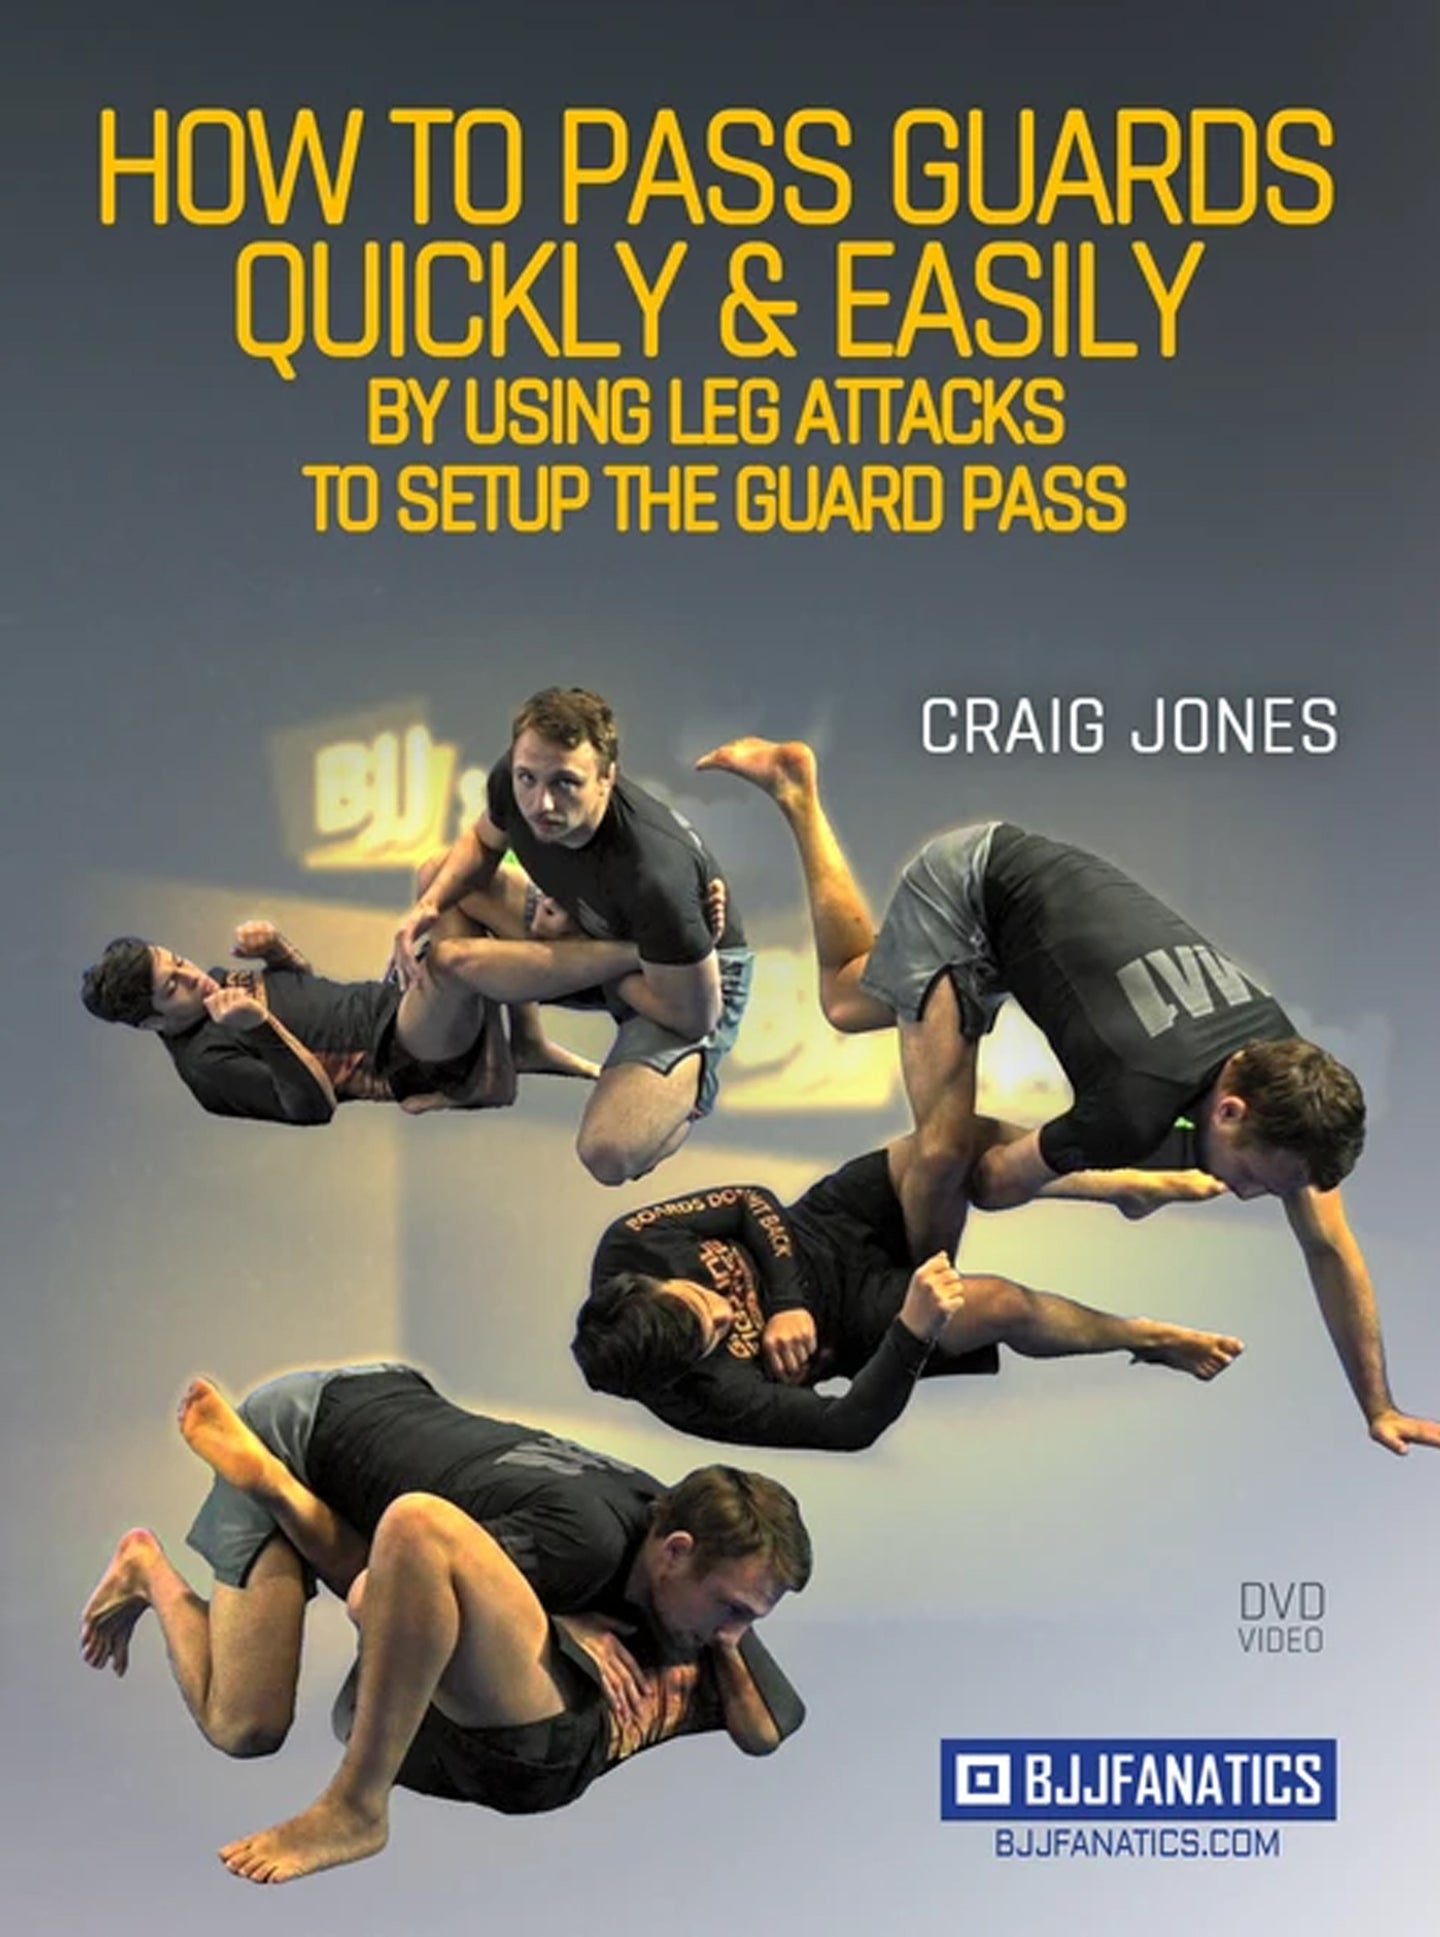 How to Pass Guards Quickly and Easily Using Leg Attacks by Craig Jones - BJJ Fanatics